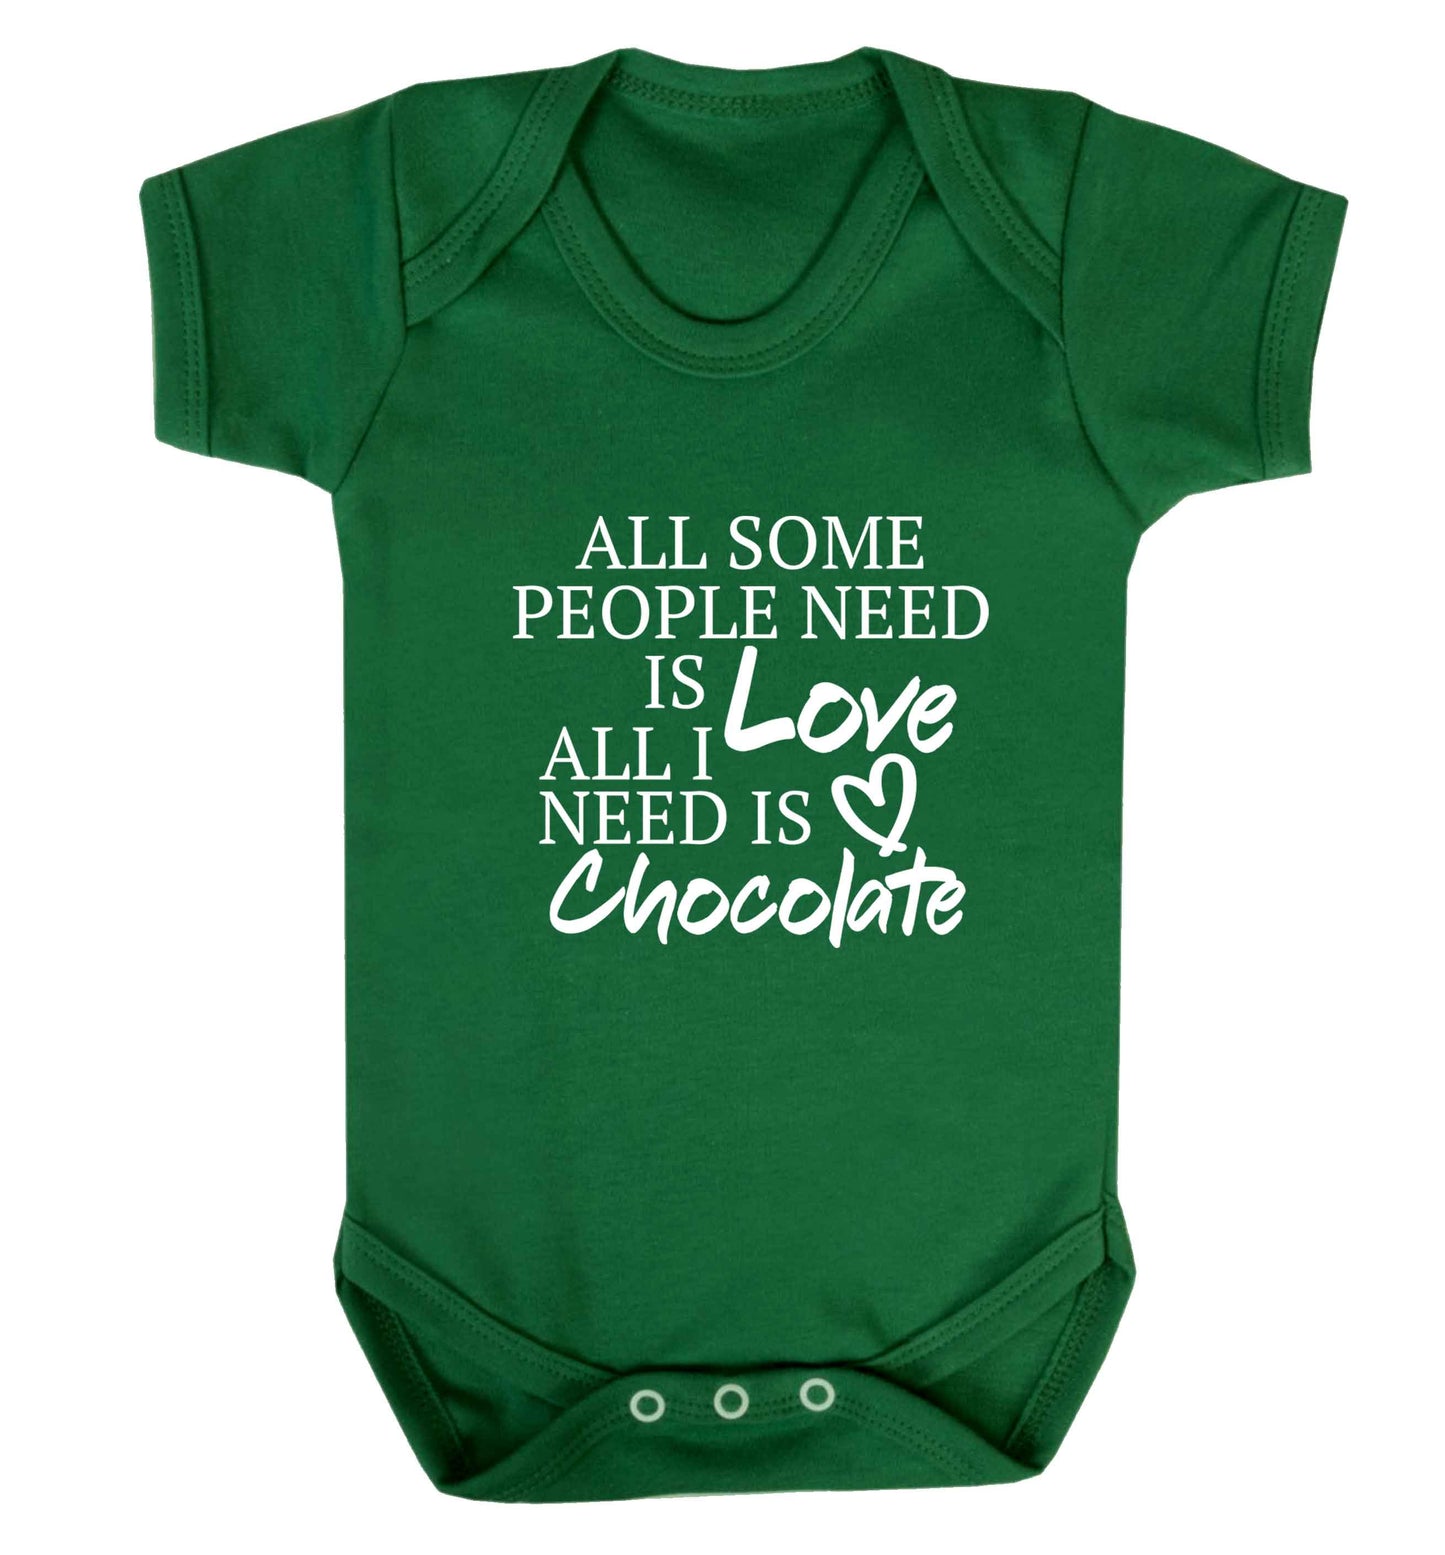 All some people need is love all I need is chocolate baby vest green 18-24 months